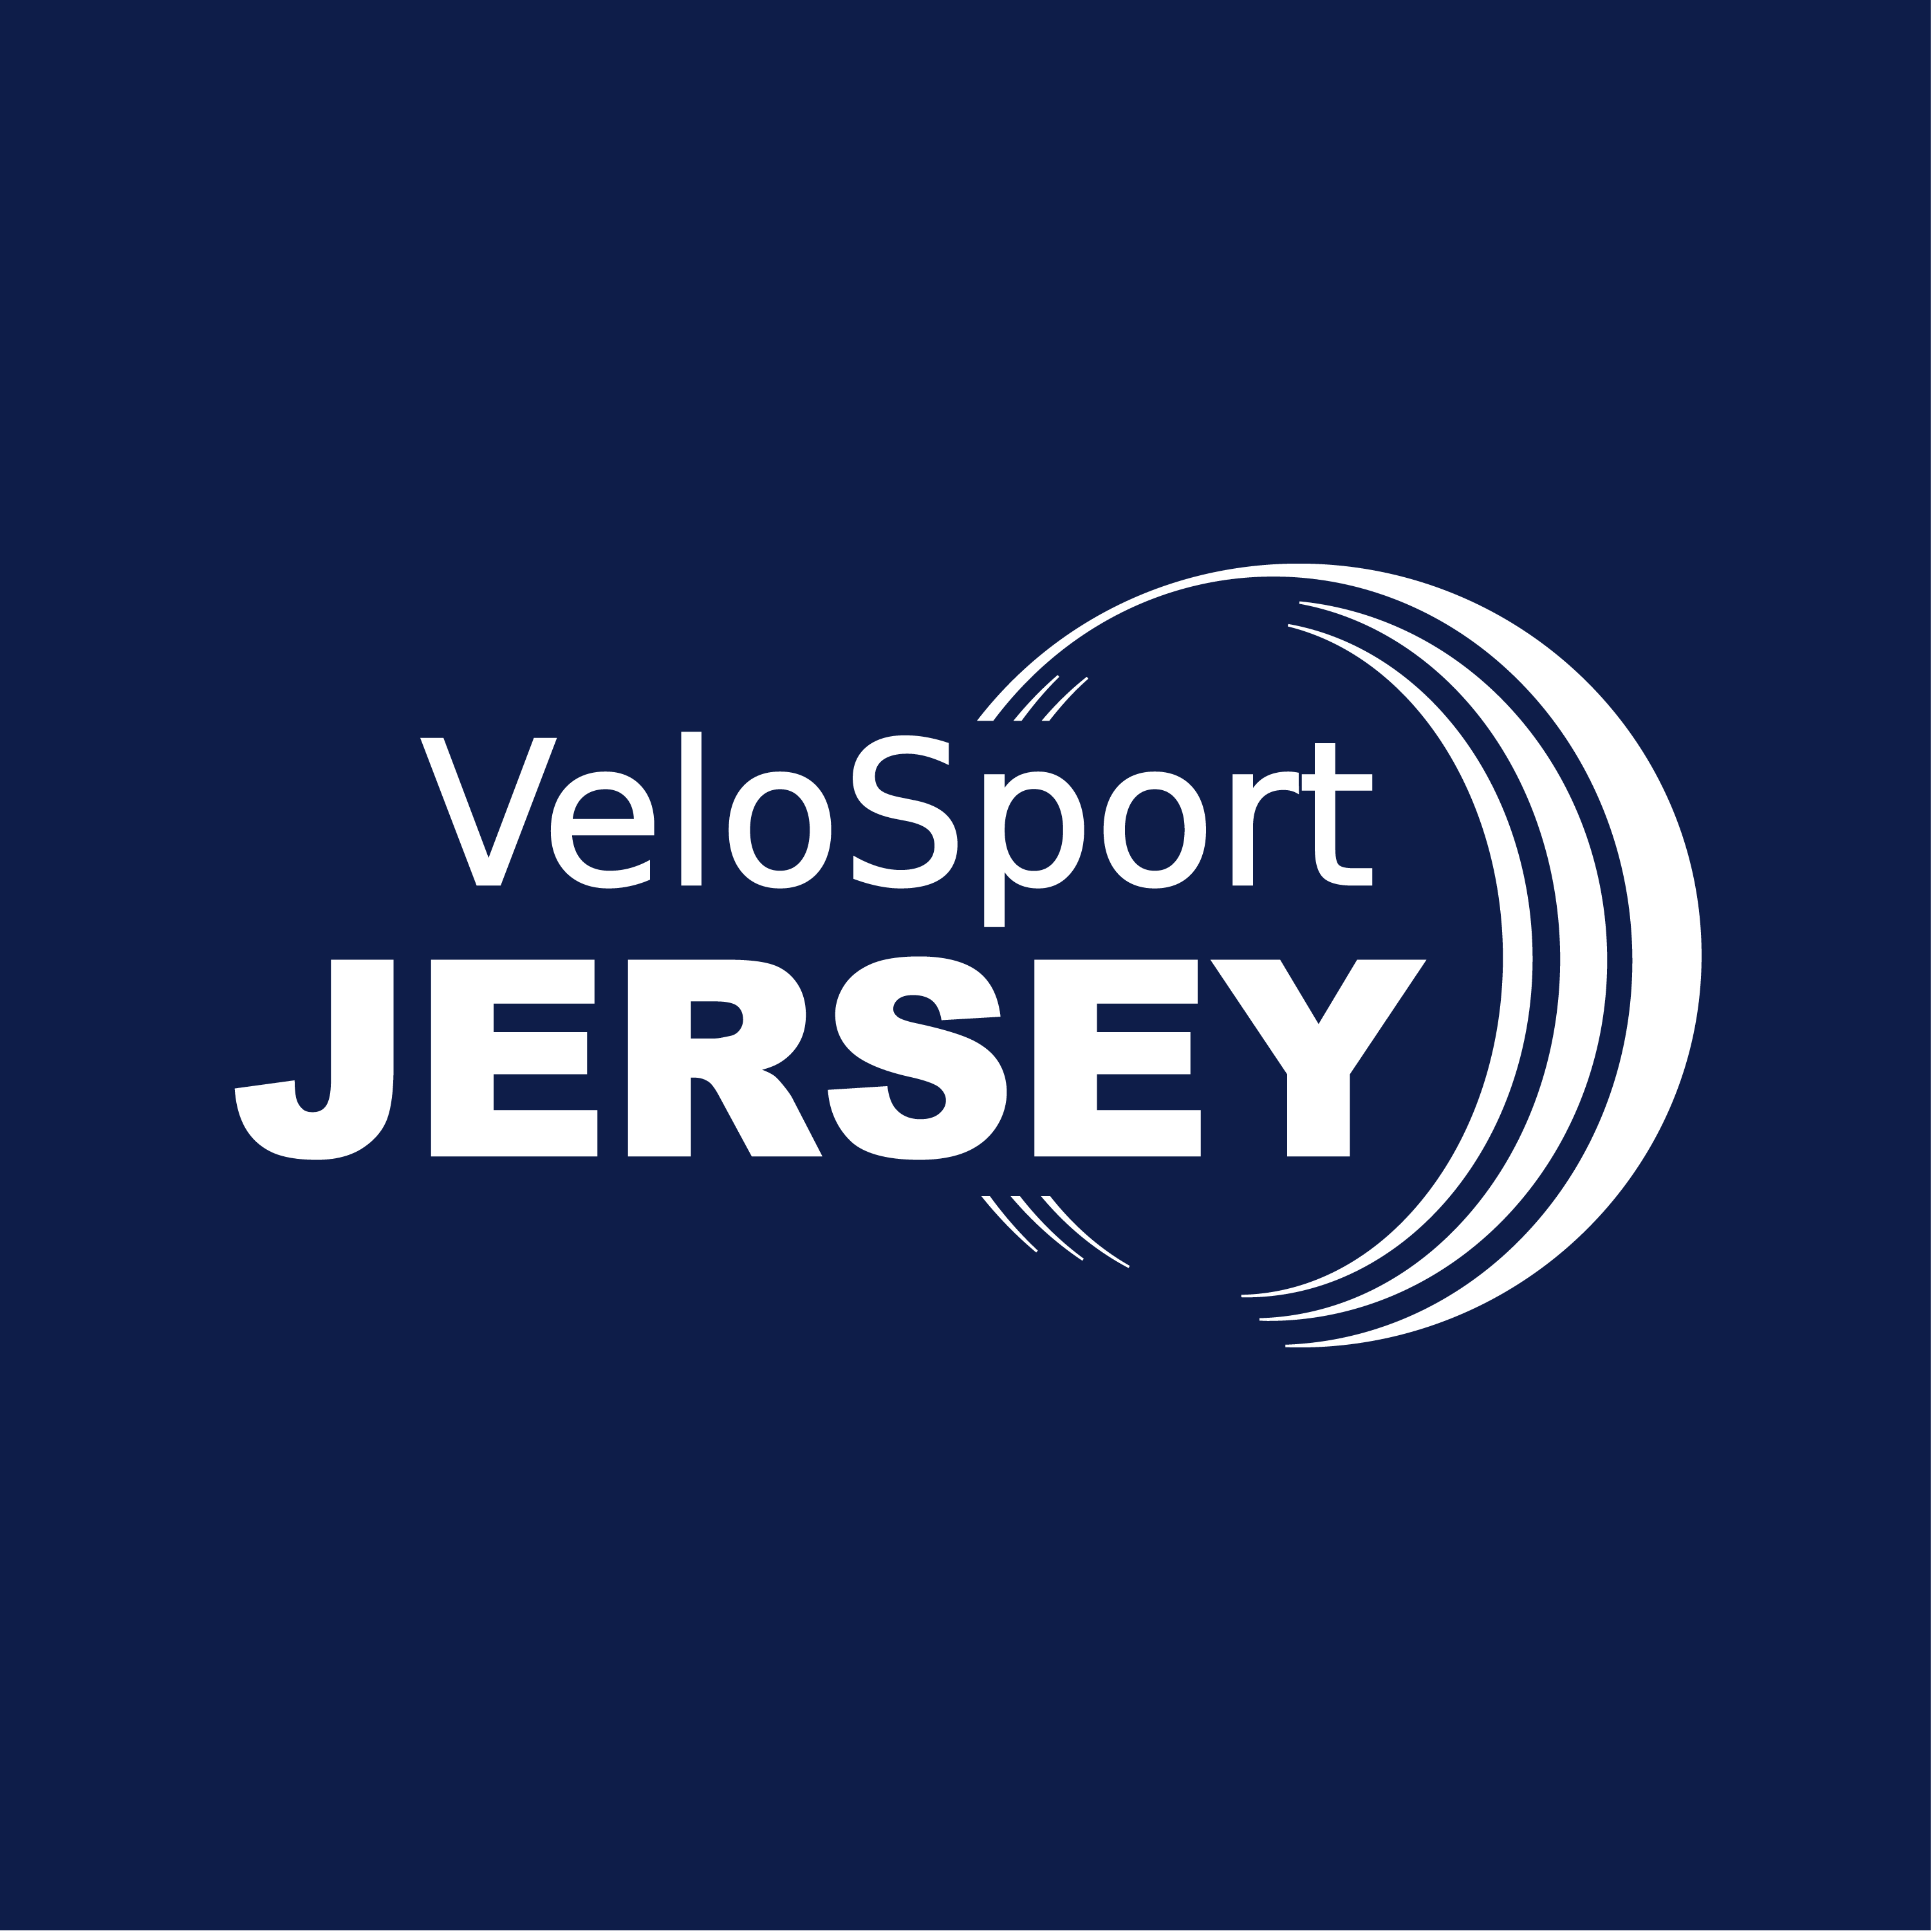 Club Image for VELO SPORT JERSEY